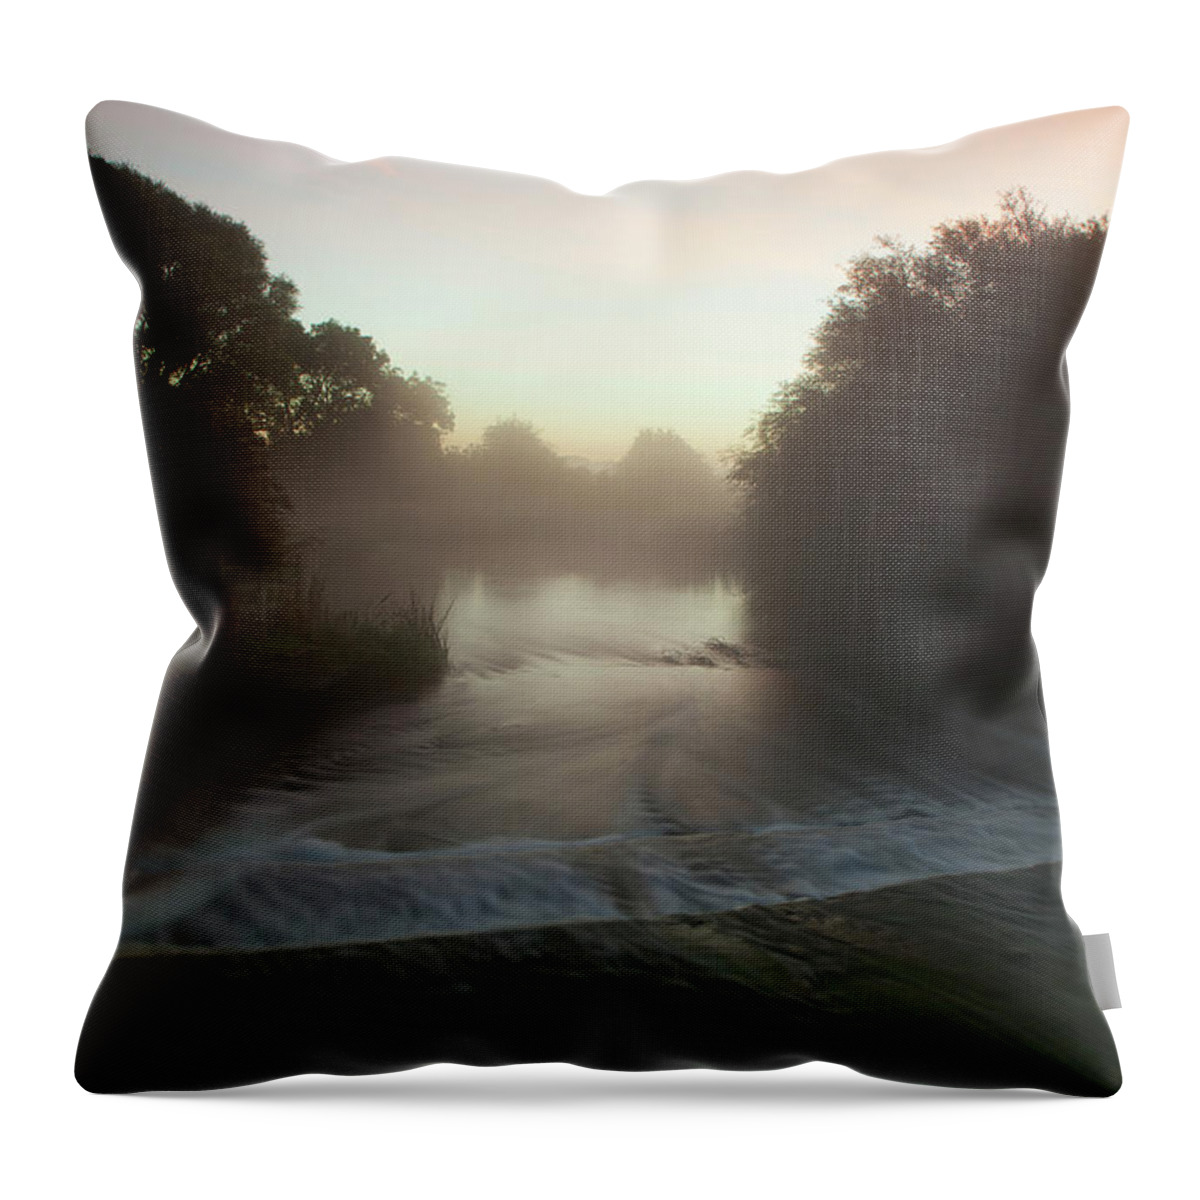 Mist Throw Pillow featuring the photograph Misty Morning by Nick Atkin